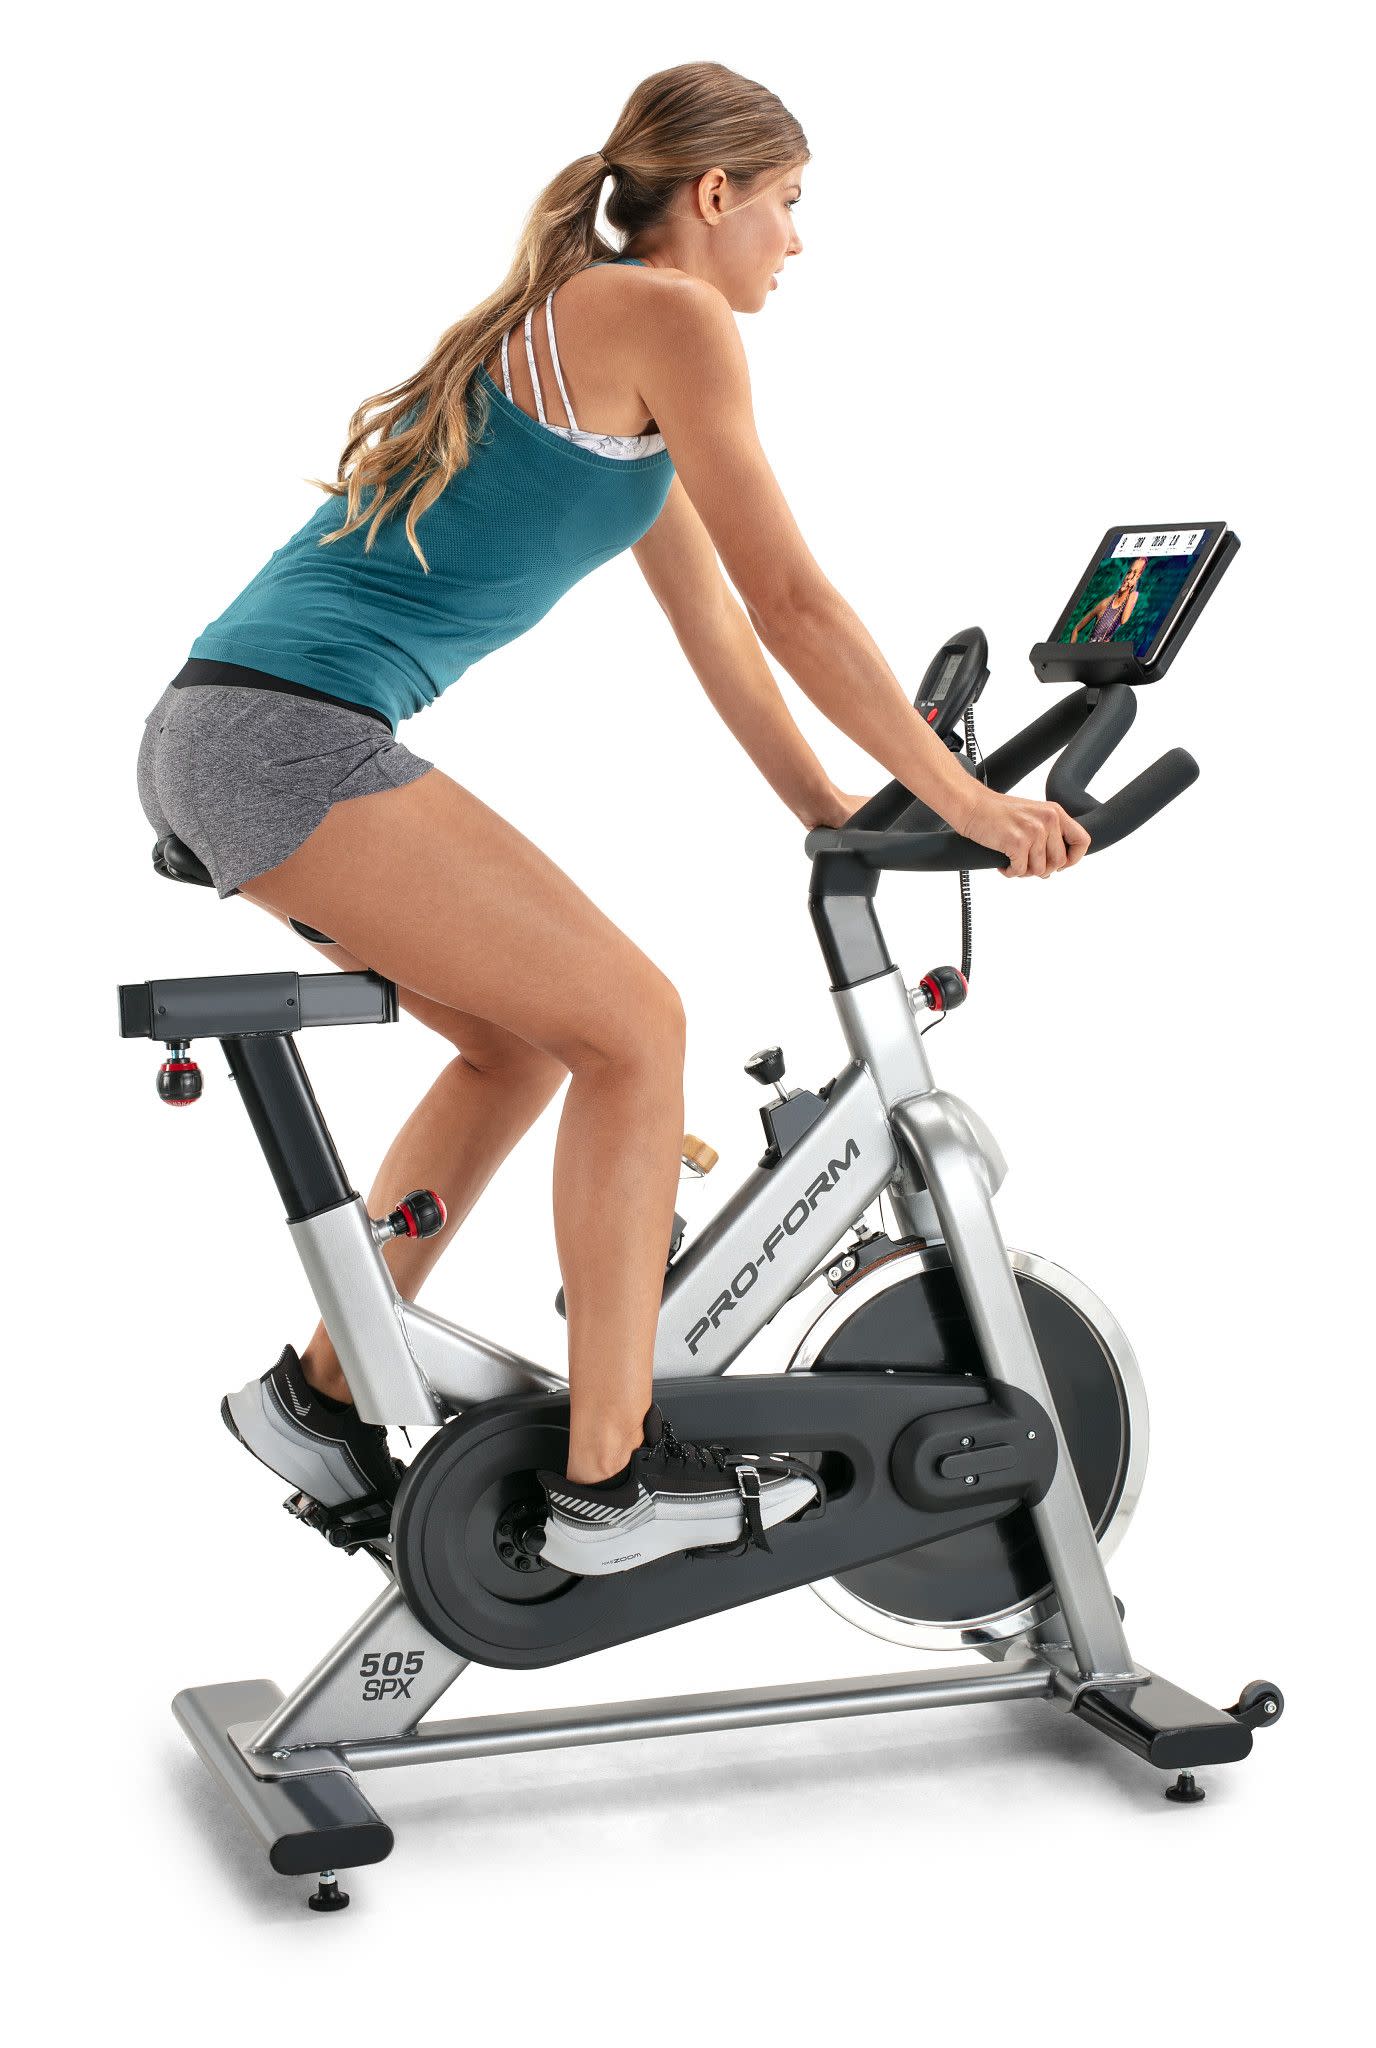 ProForm 505 SPX Indoor Cycle with Quick Manual Resistance Knob, Exercise Bike - image 4 of 9